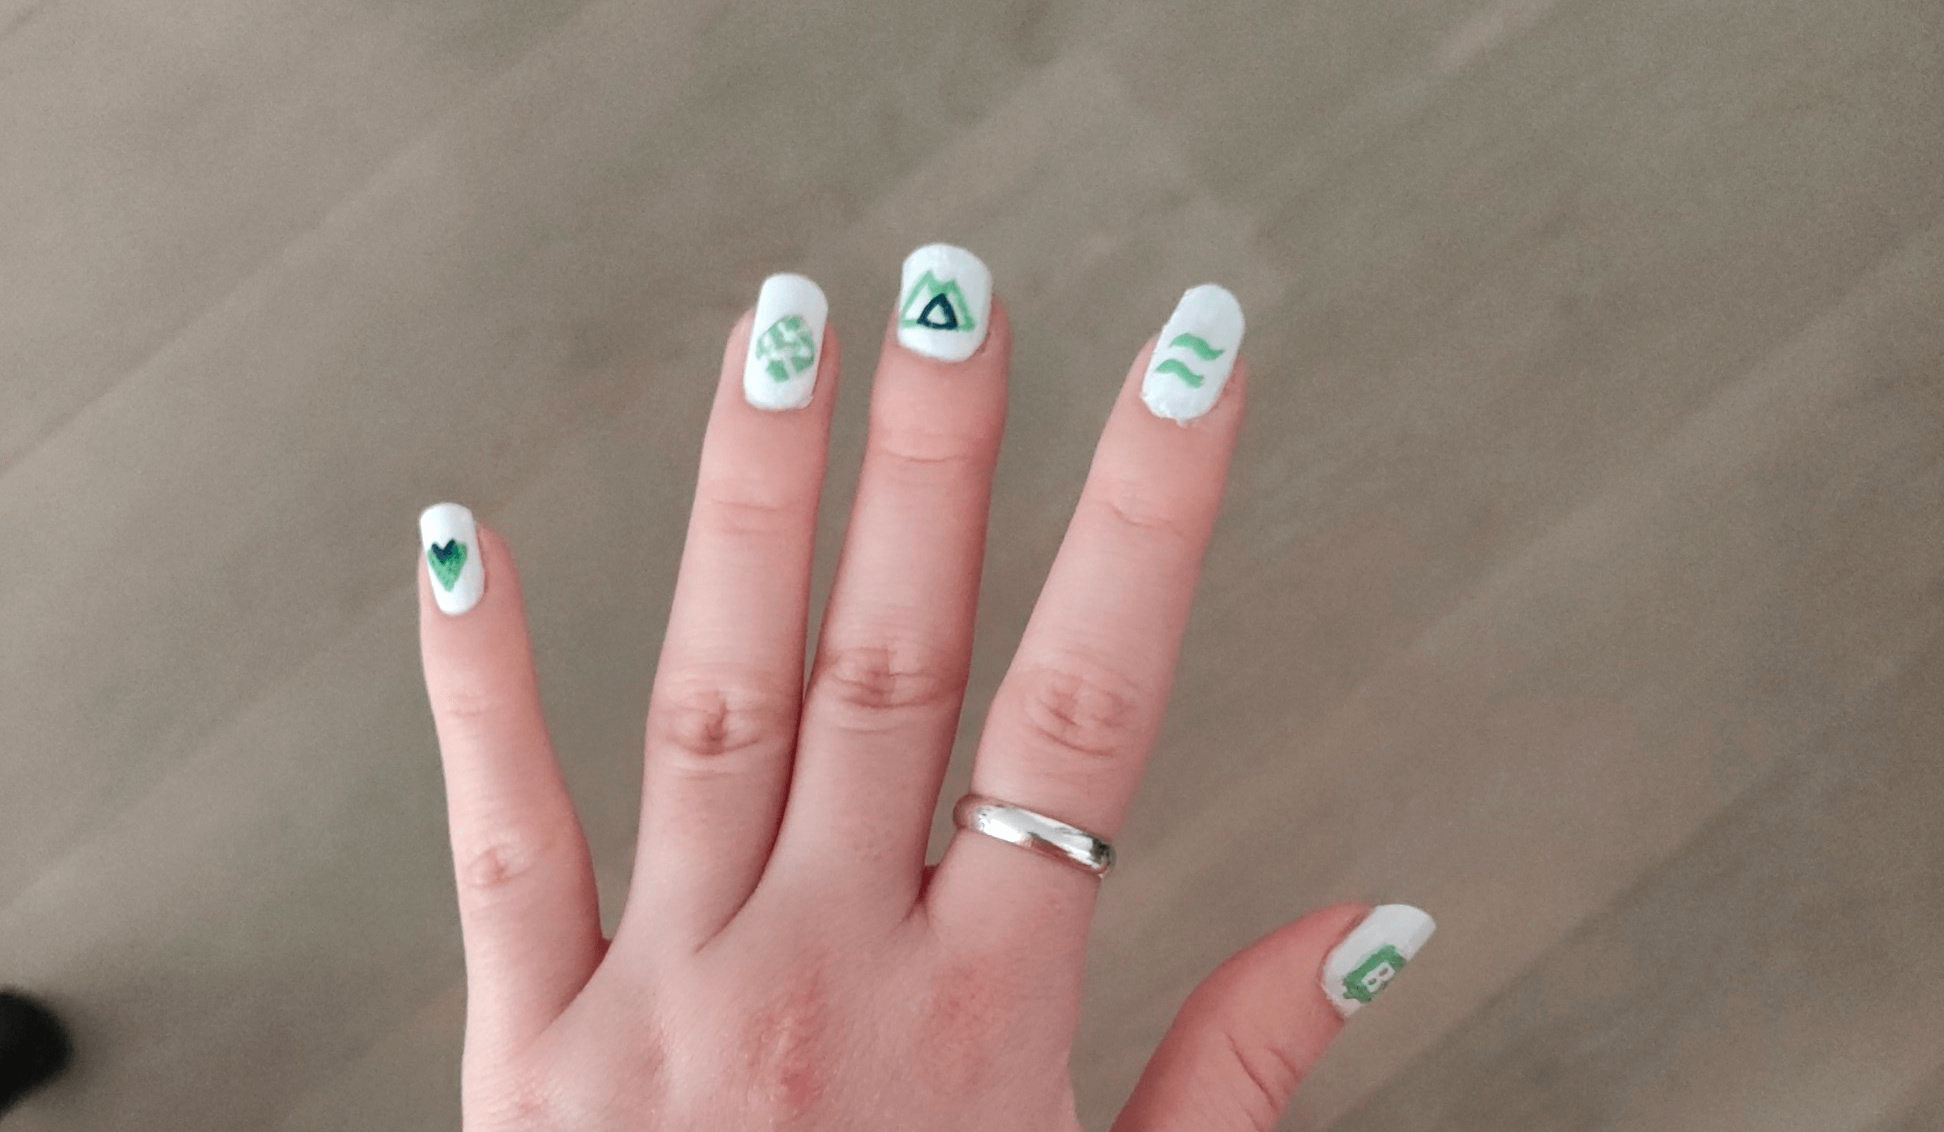 Real painted Jamstack nails including Netlify, Nuxt, Storyblok, Vue and TailwindCSS logos